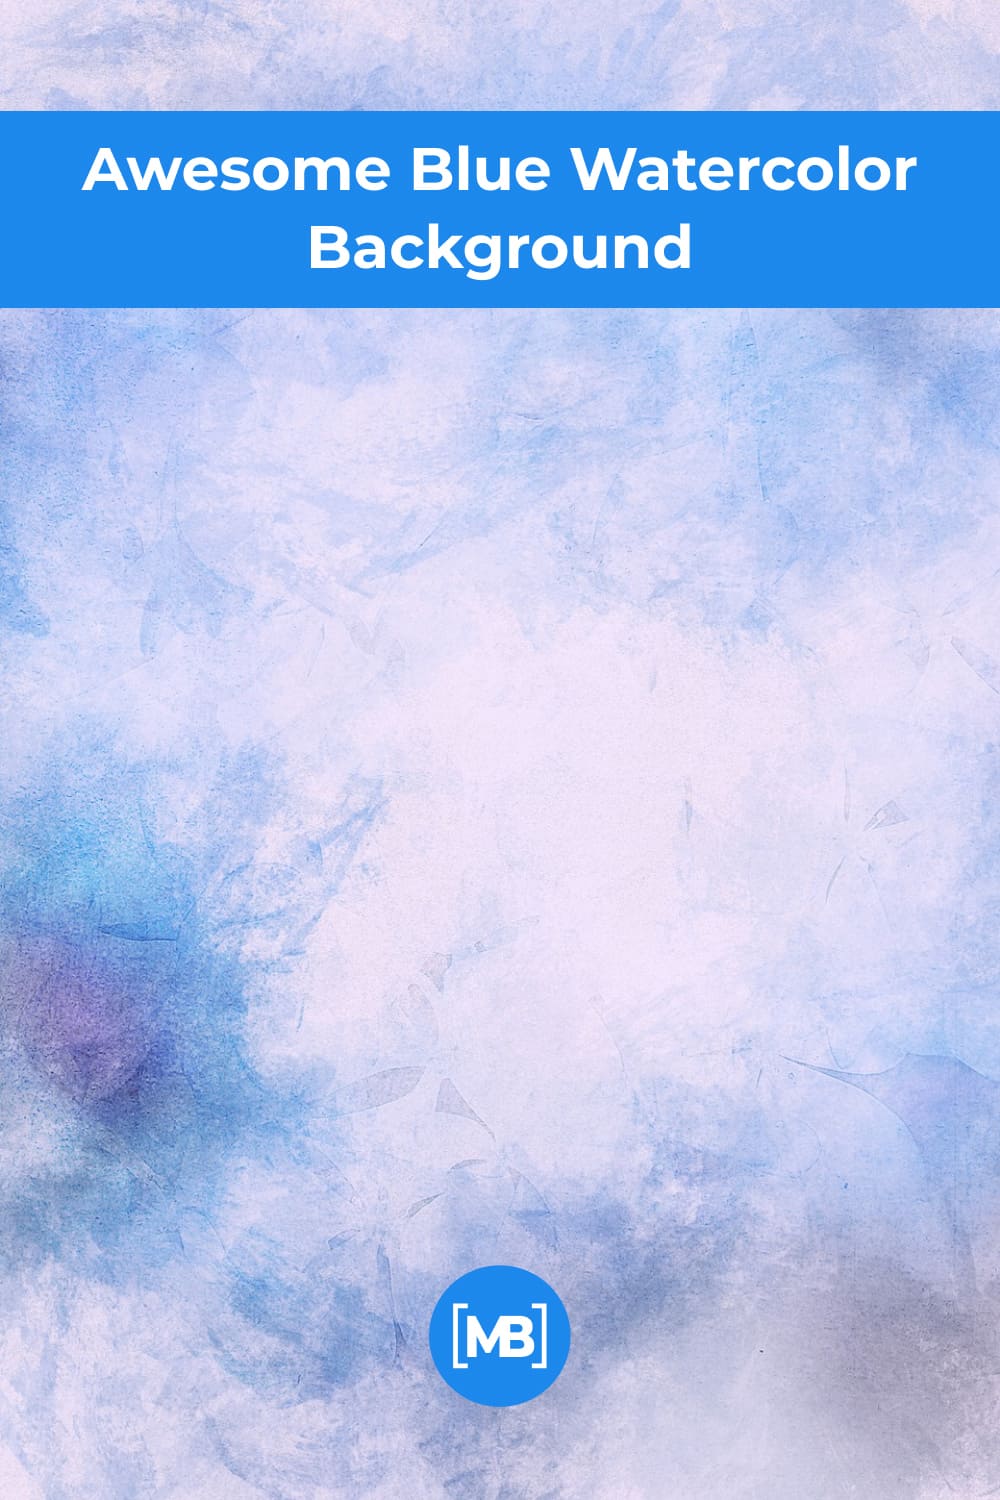 Awesome blue watercolor background.